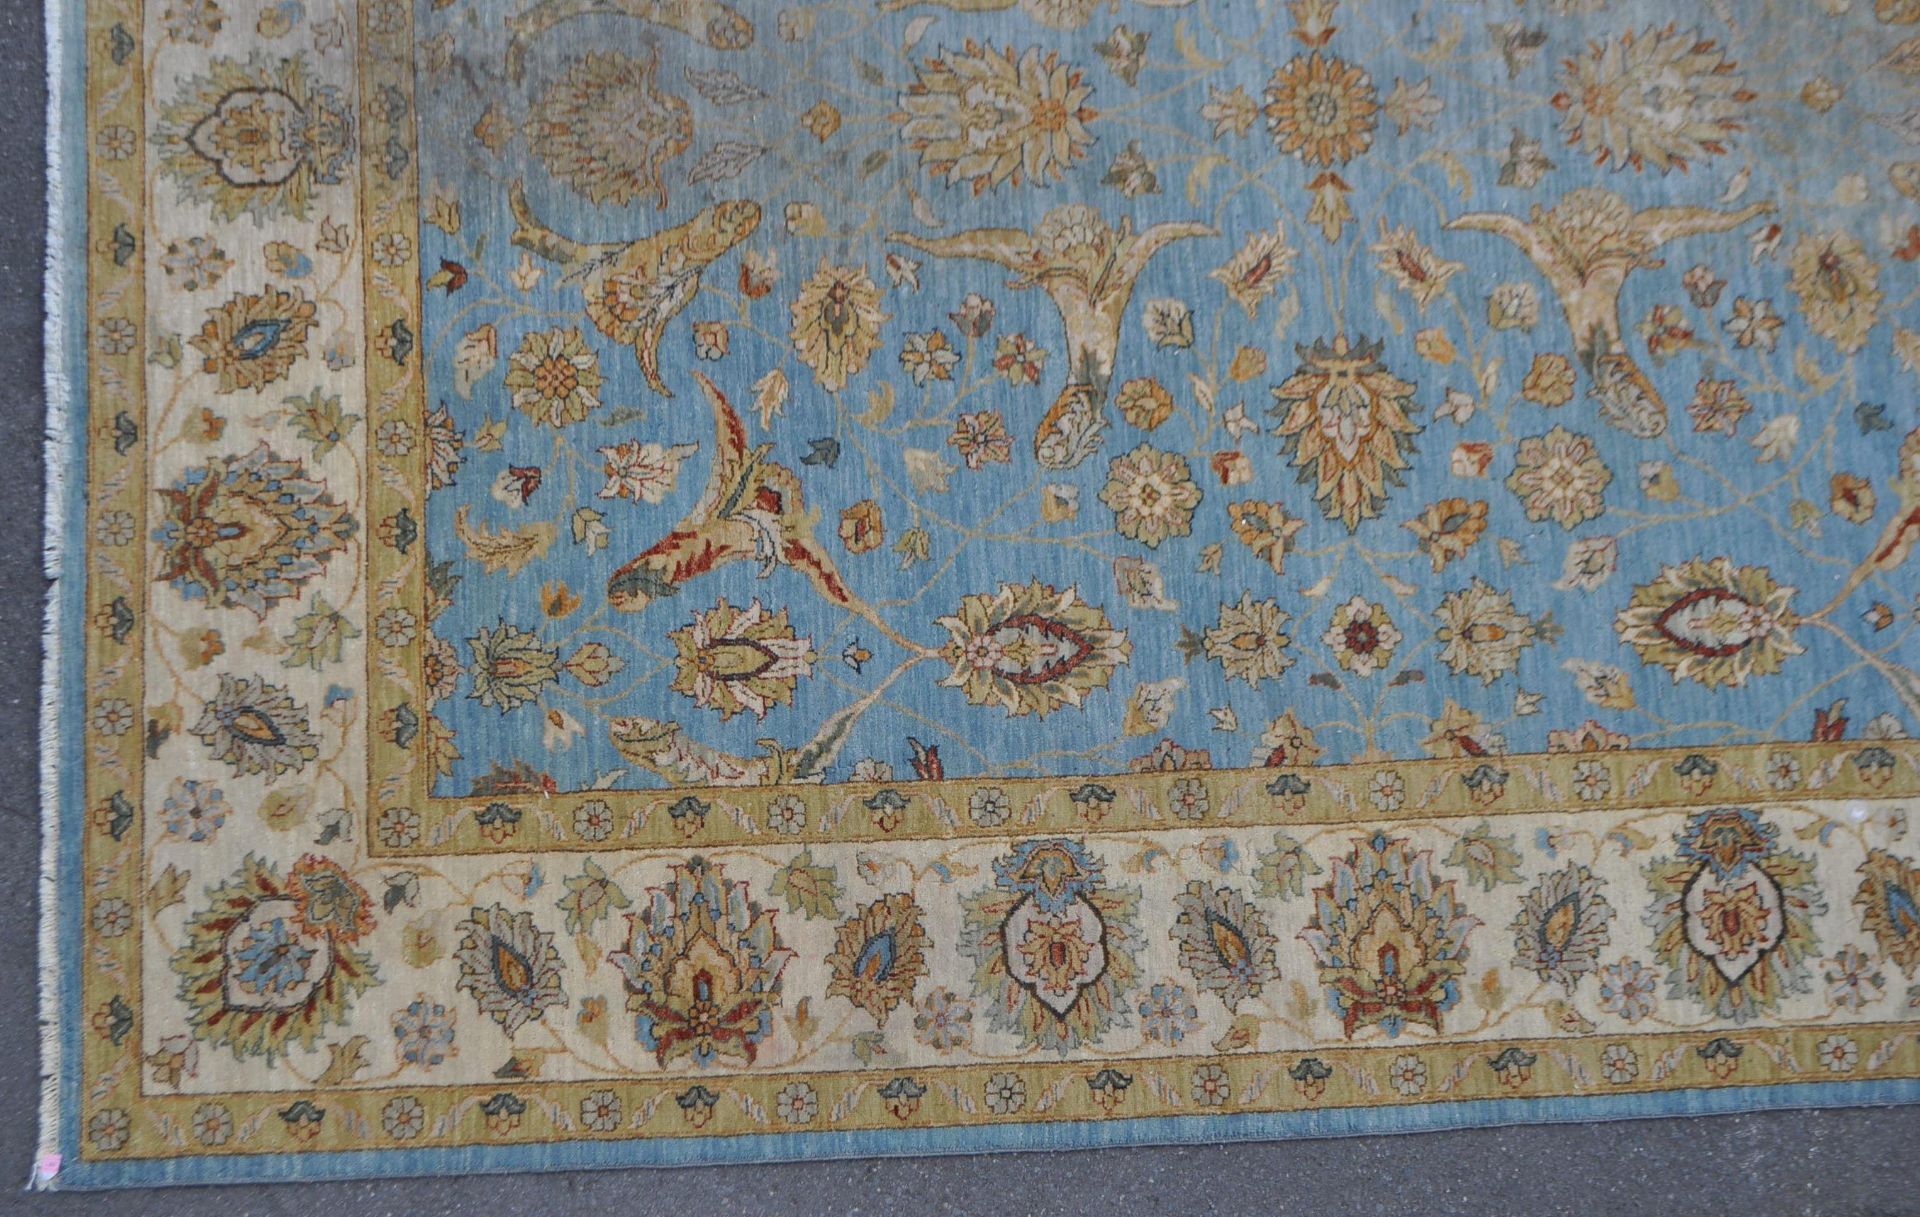 CONTEMPORARY PERSIAN MANNER CARPET - Image 2 of 3